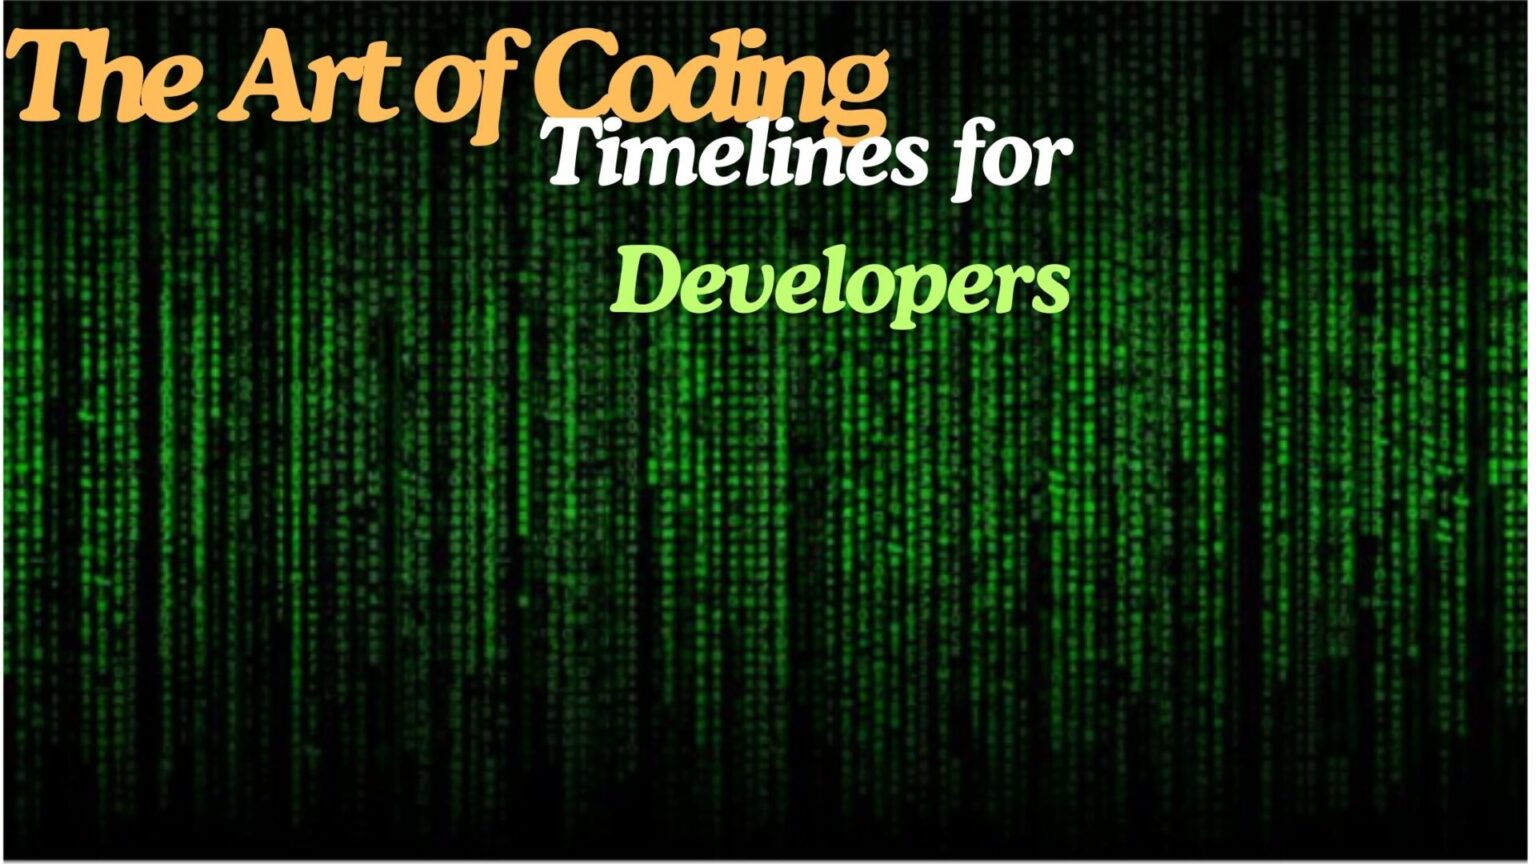 The Art of Coding:Timelines for Developers